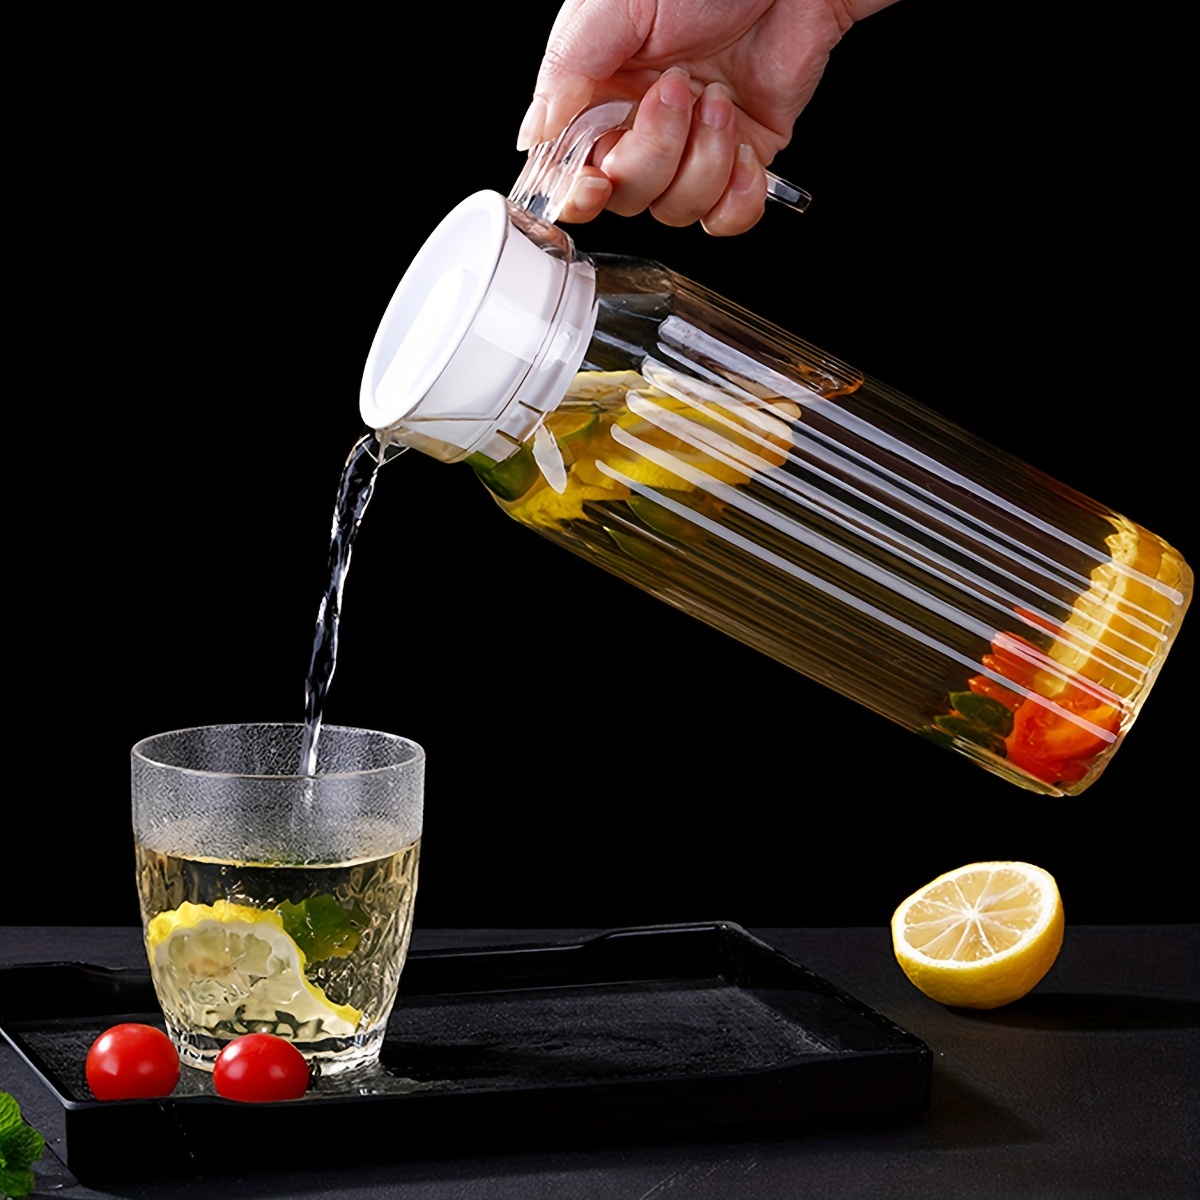 Glass Pitcher - Beverage Serveware and Storage Container for Hot